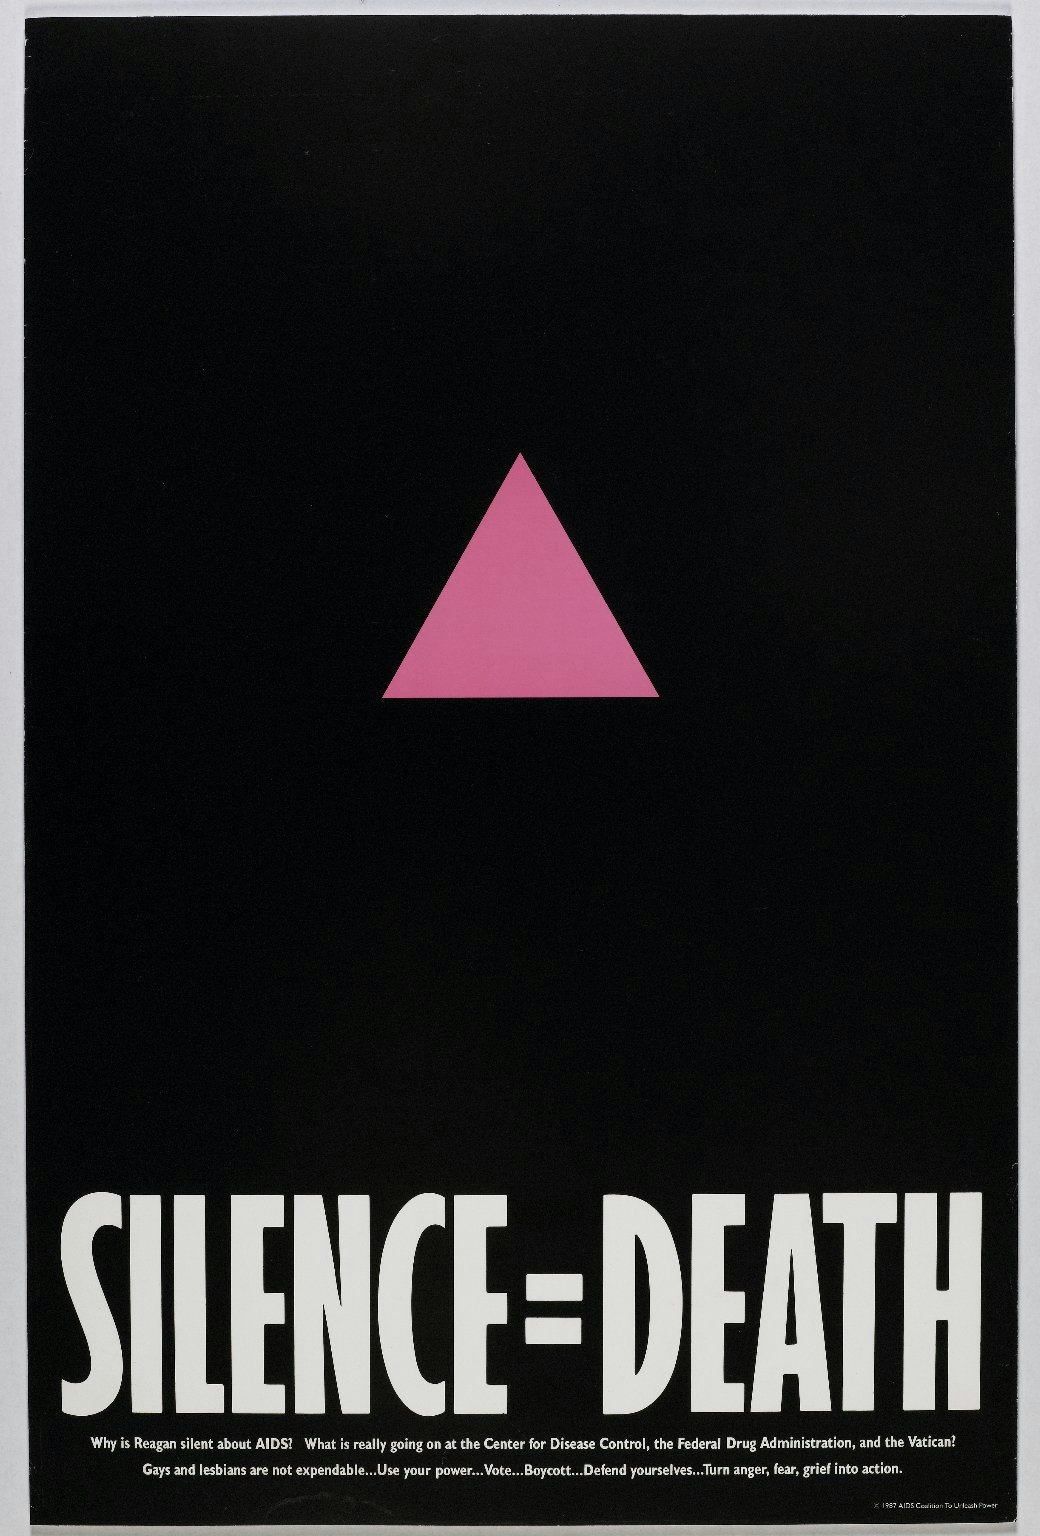 A pink triangle with the apex pointed up sits in hte centre of hte poster against a plain black background. At the bottom of the rectangular poster are tthe words "SILENCE = DEATH".